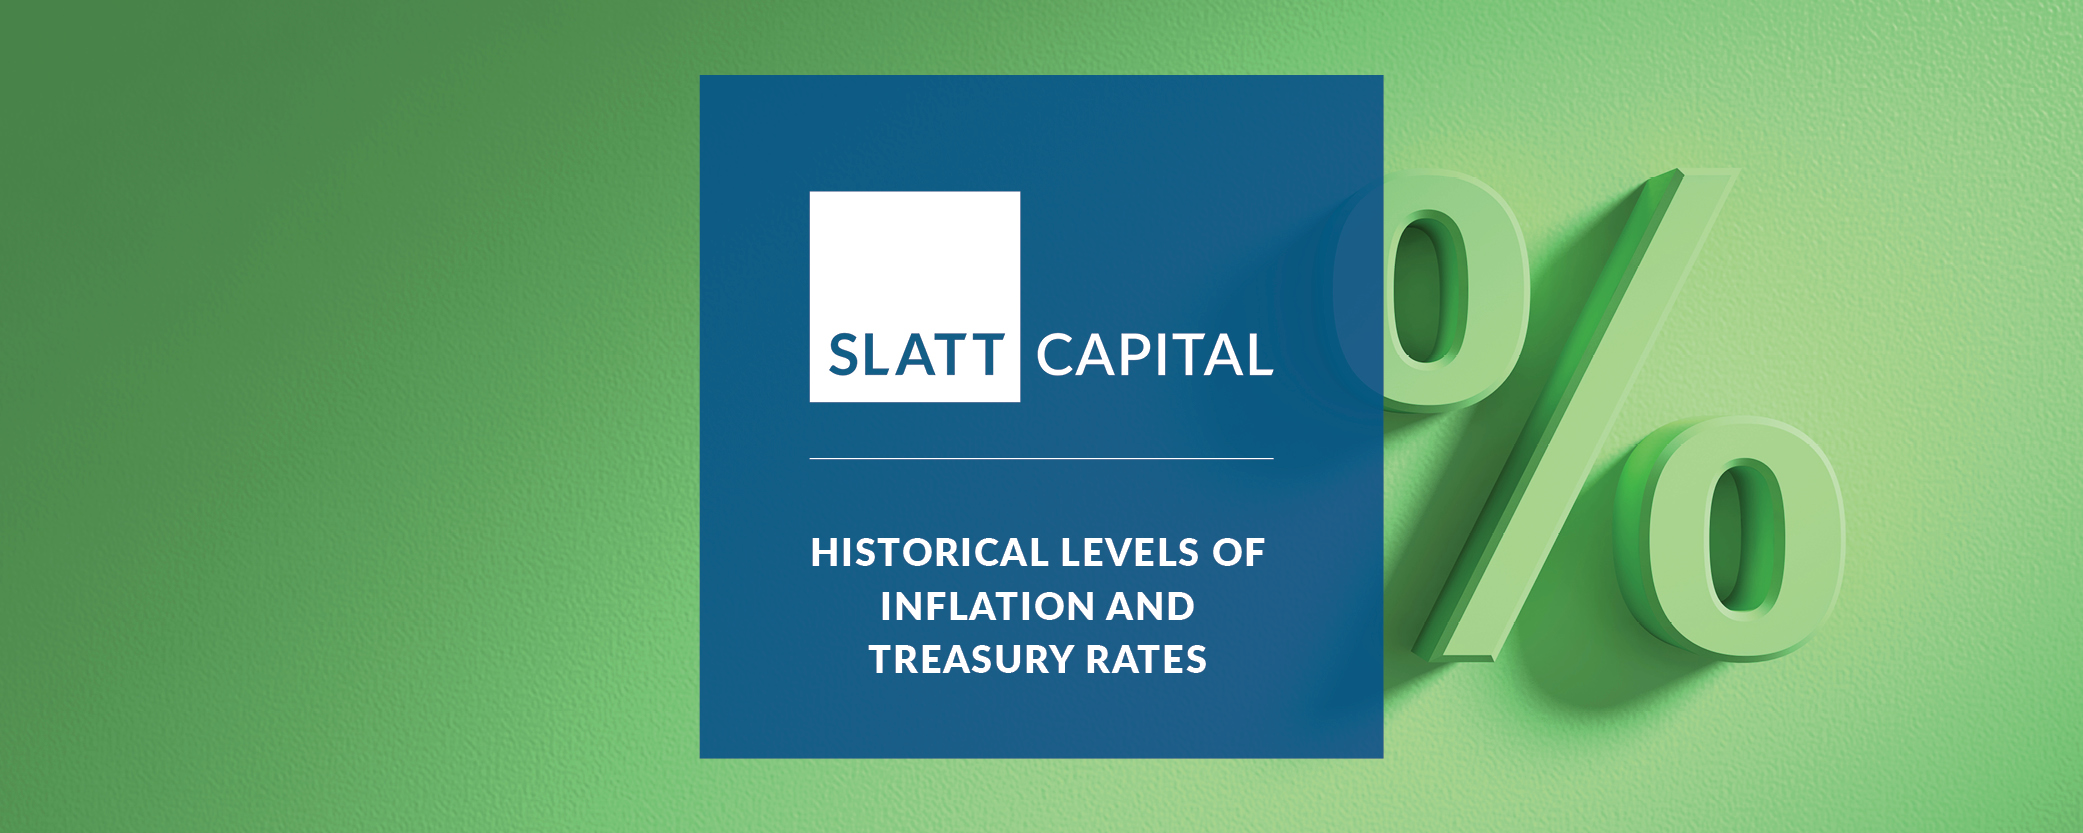 Historical levels of inflation and treasury rates